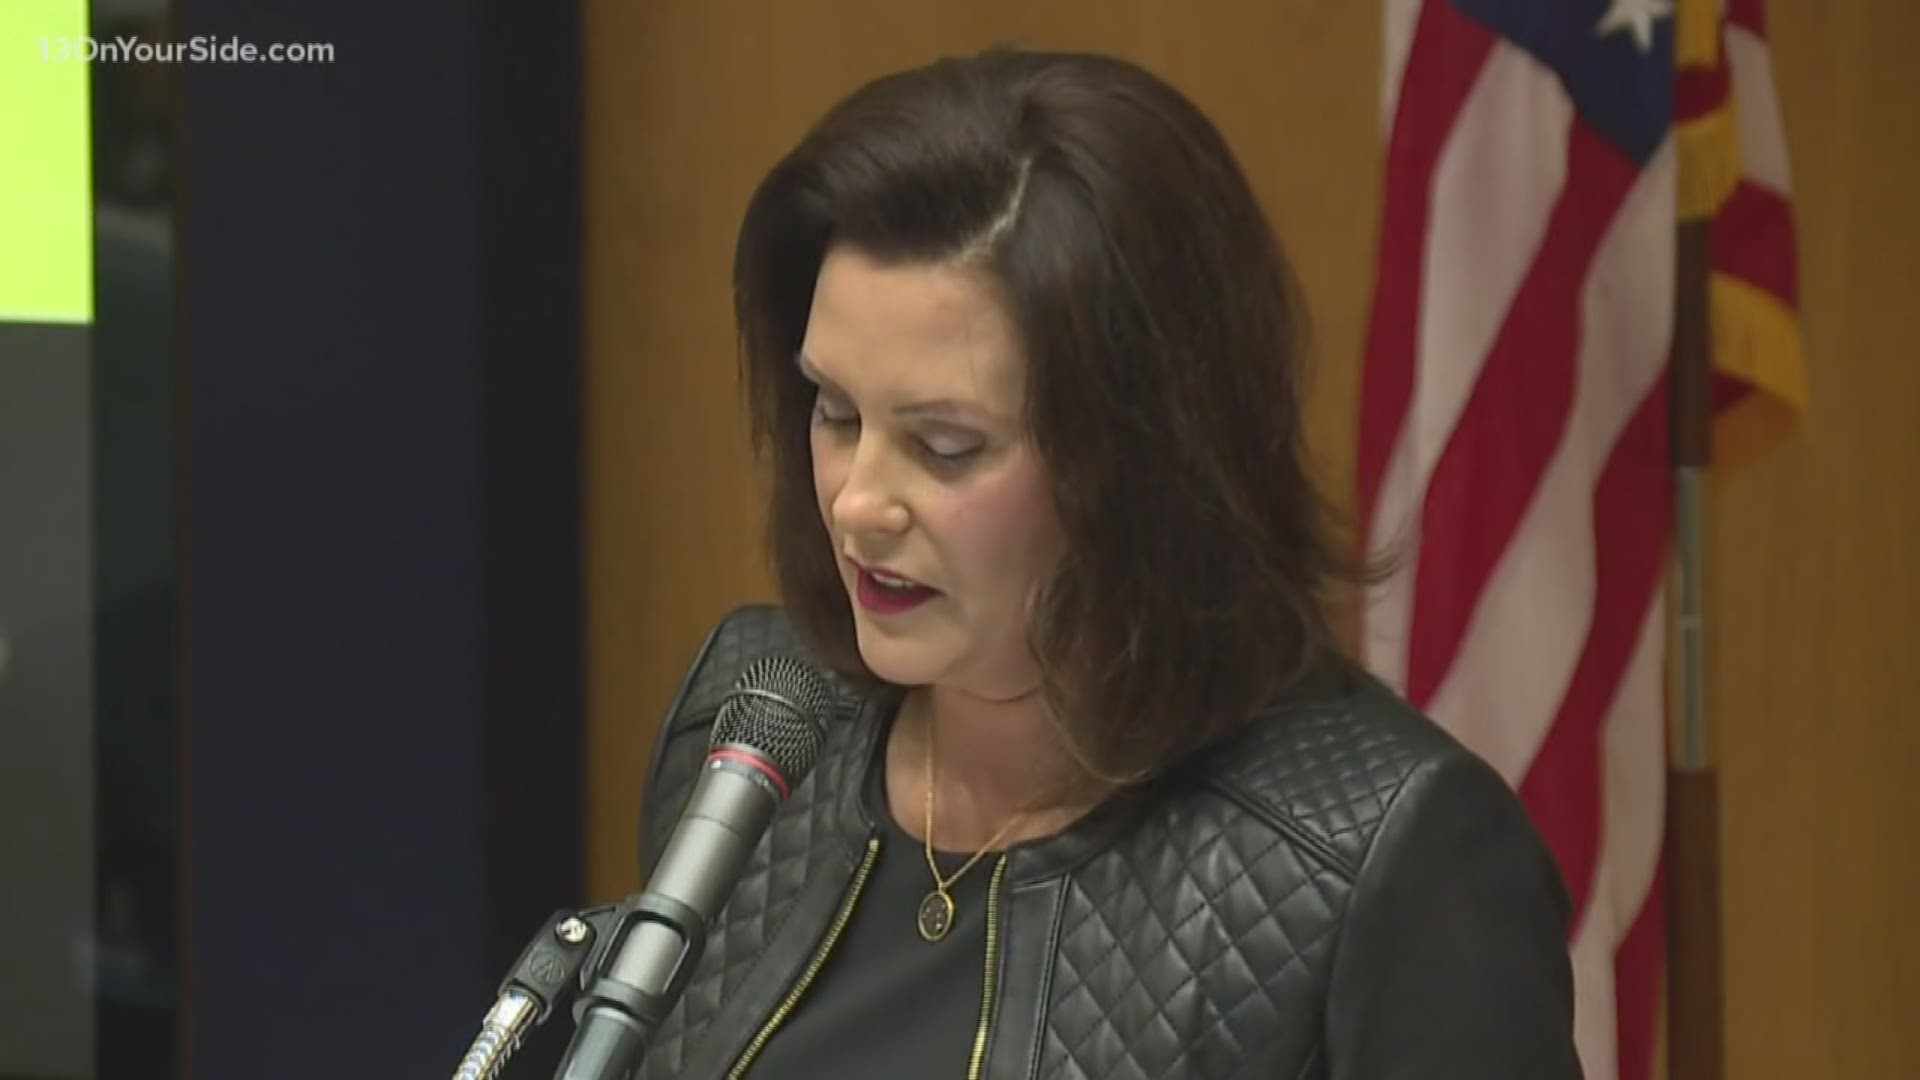 Gov. Gretchen Whitmer said Wednesday she will seek funding for a variety of budget priorities from the Republican-led Legislature after she slashed nearly $1 billion